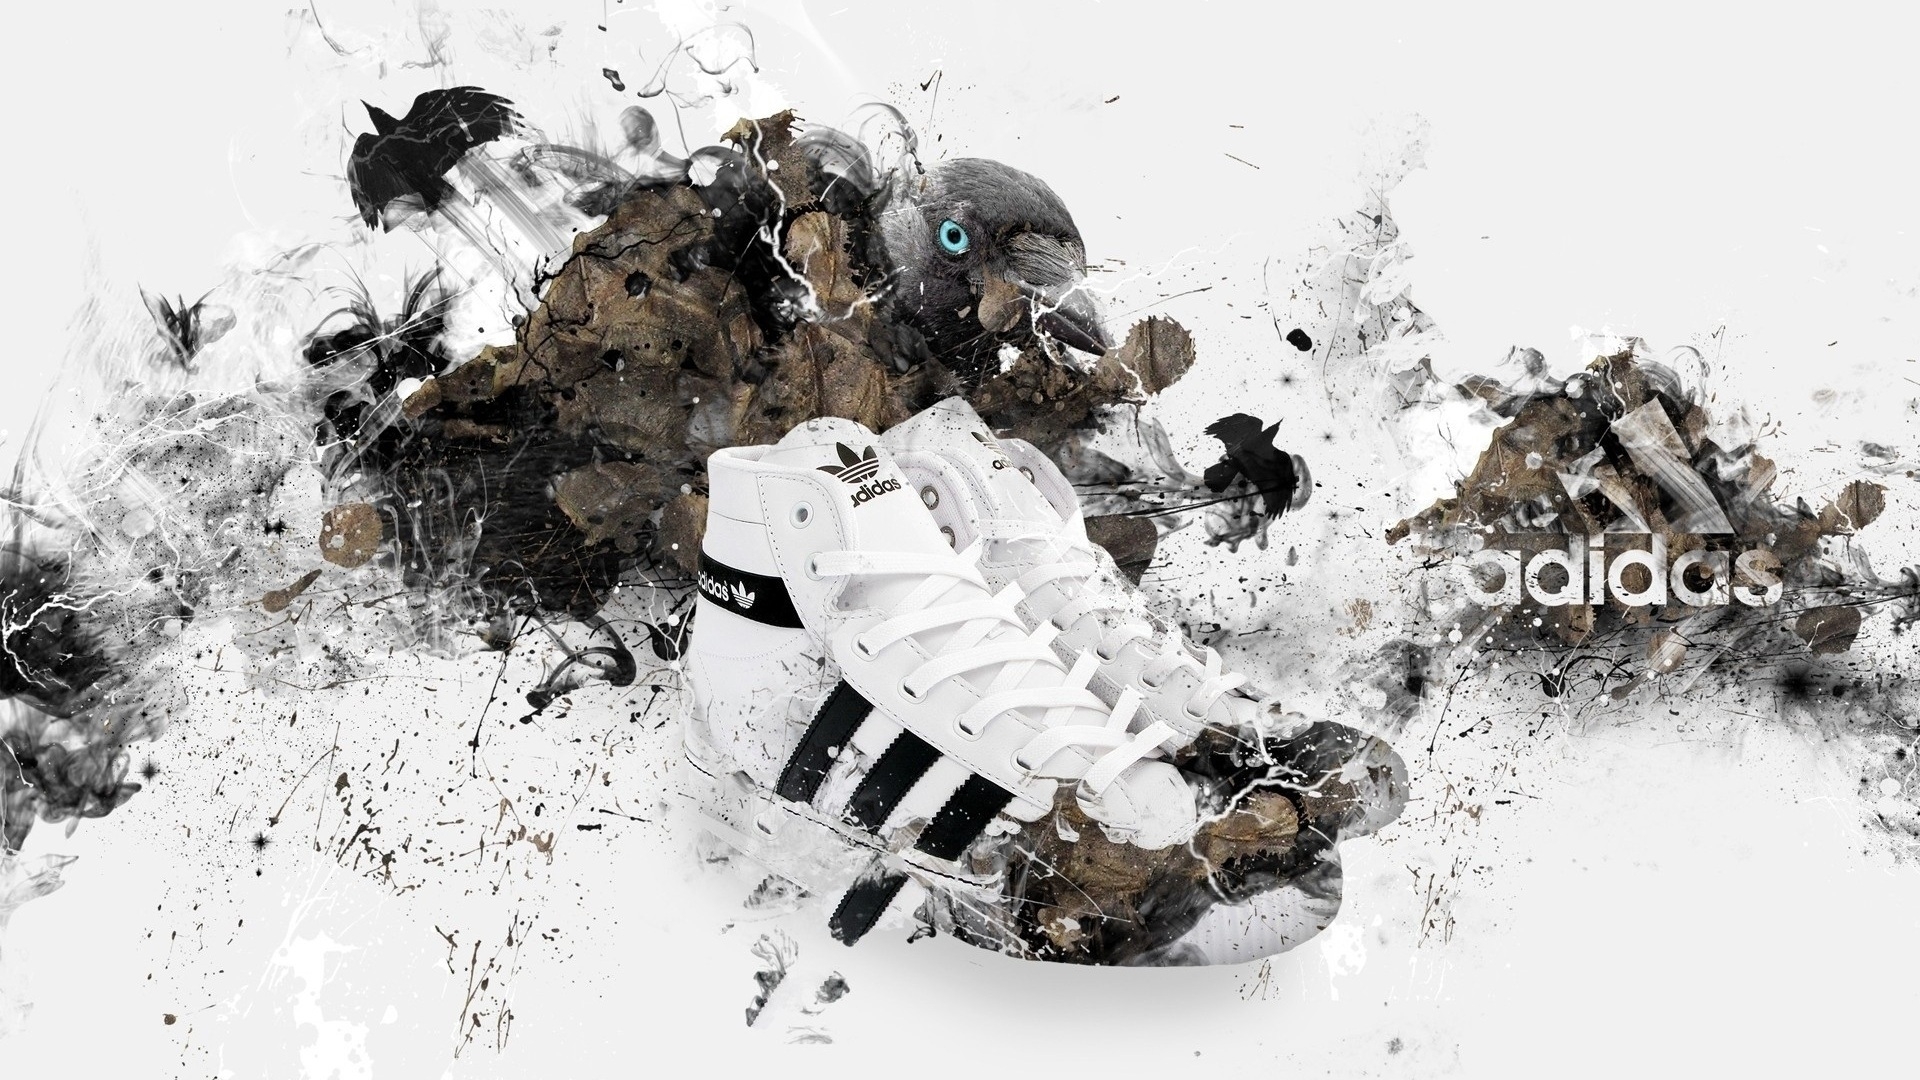 Adidas Shoes for 1920 x 1080 HDTV 1080p resolution